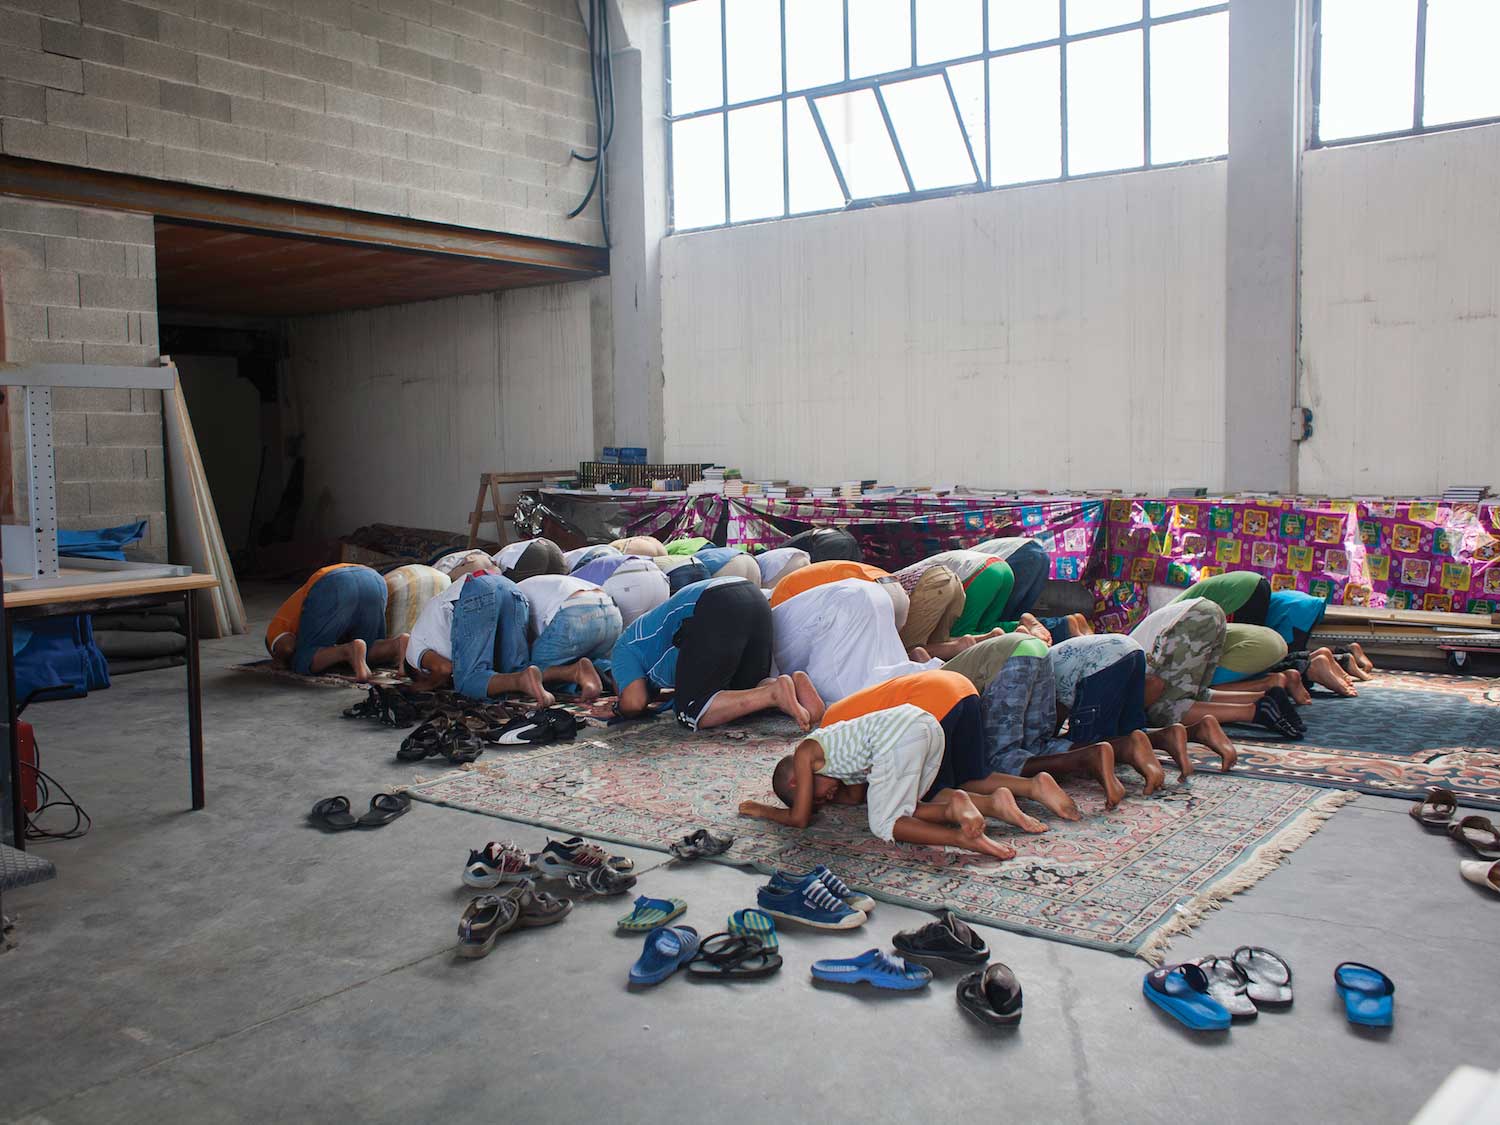 A warehouse used as makeshift place of worship for Muslims in the Province of Verona, Italy.